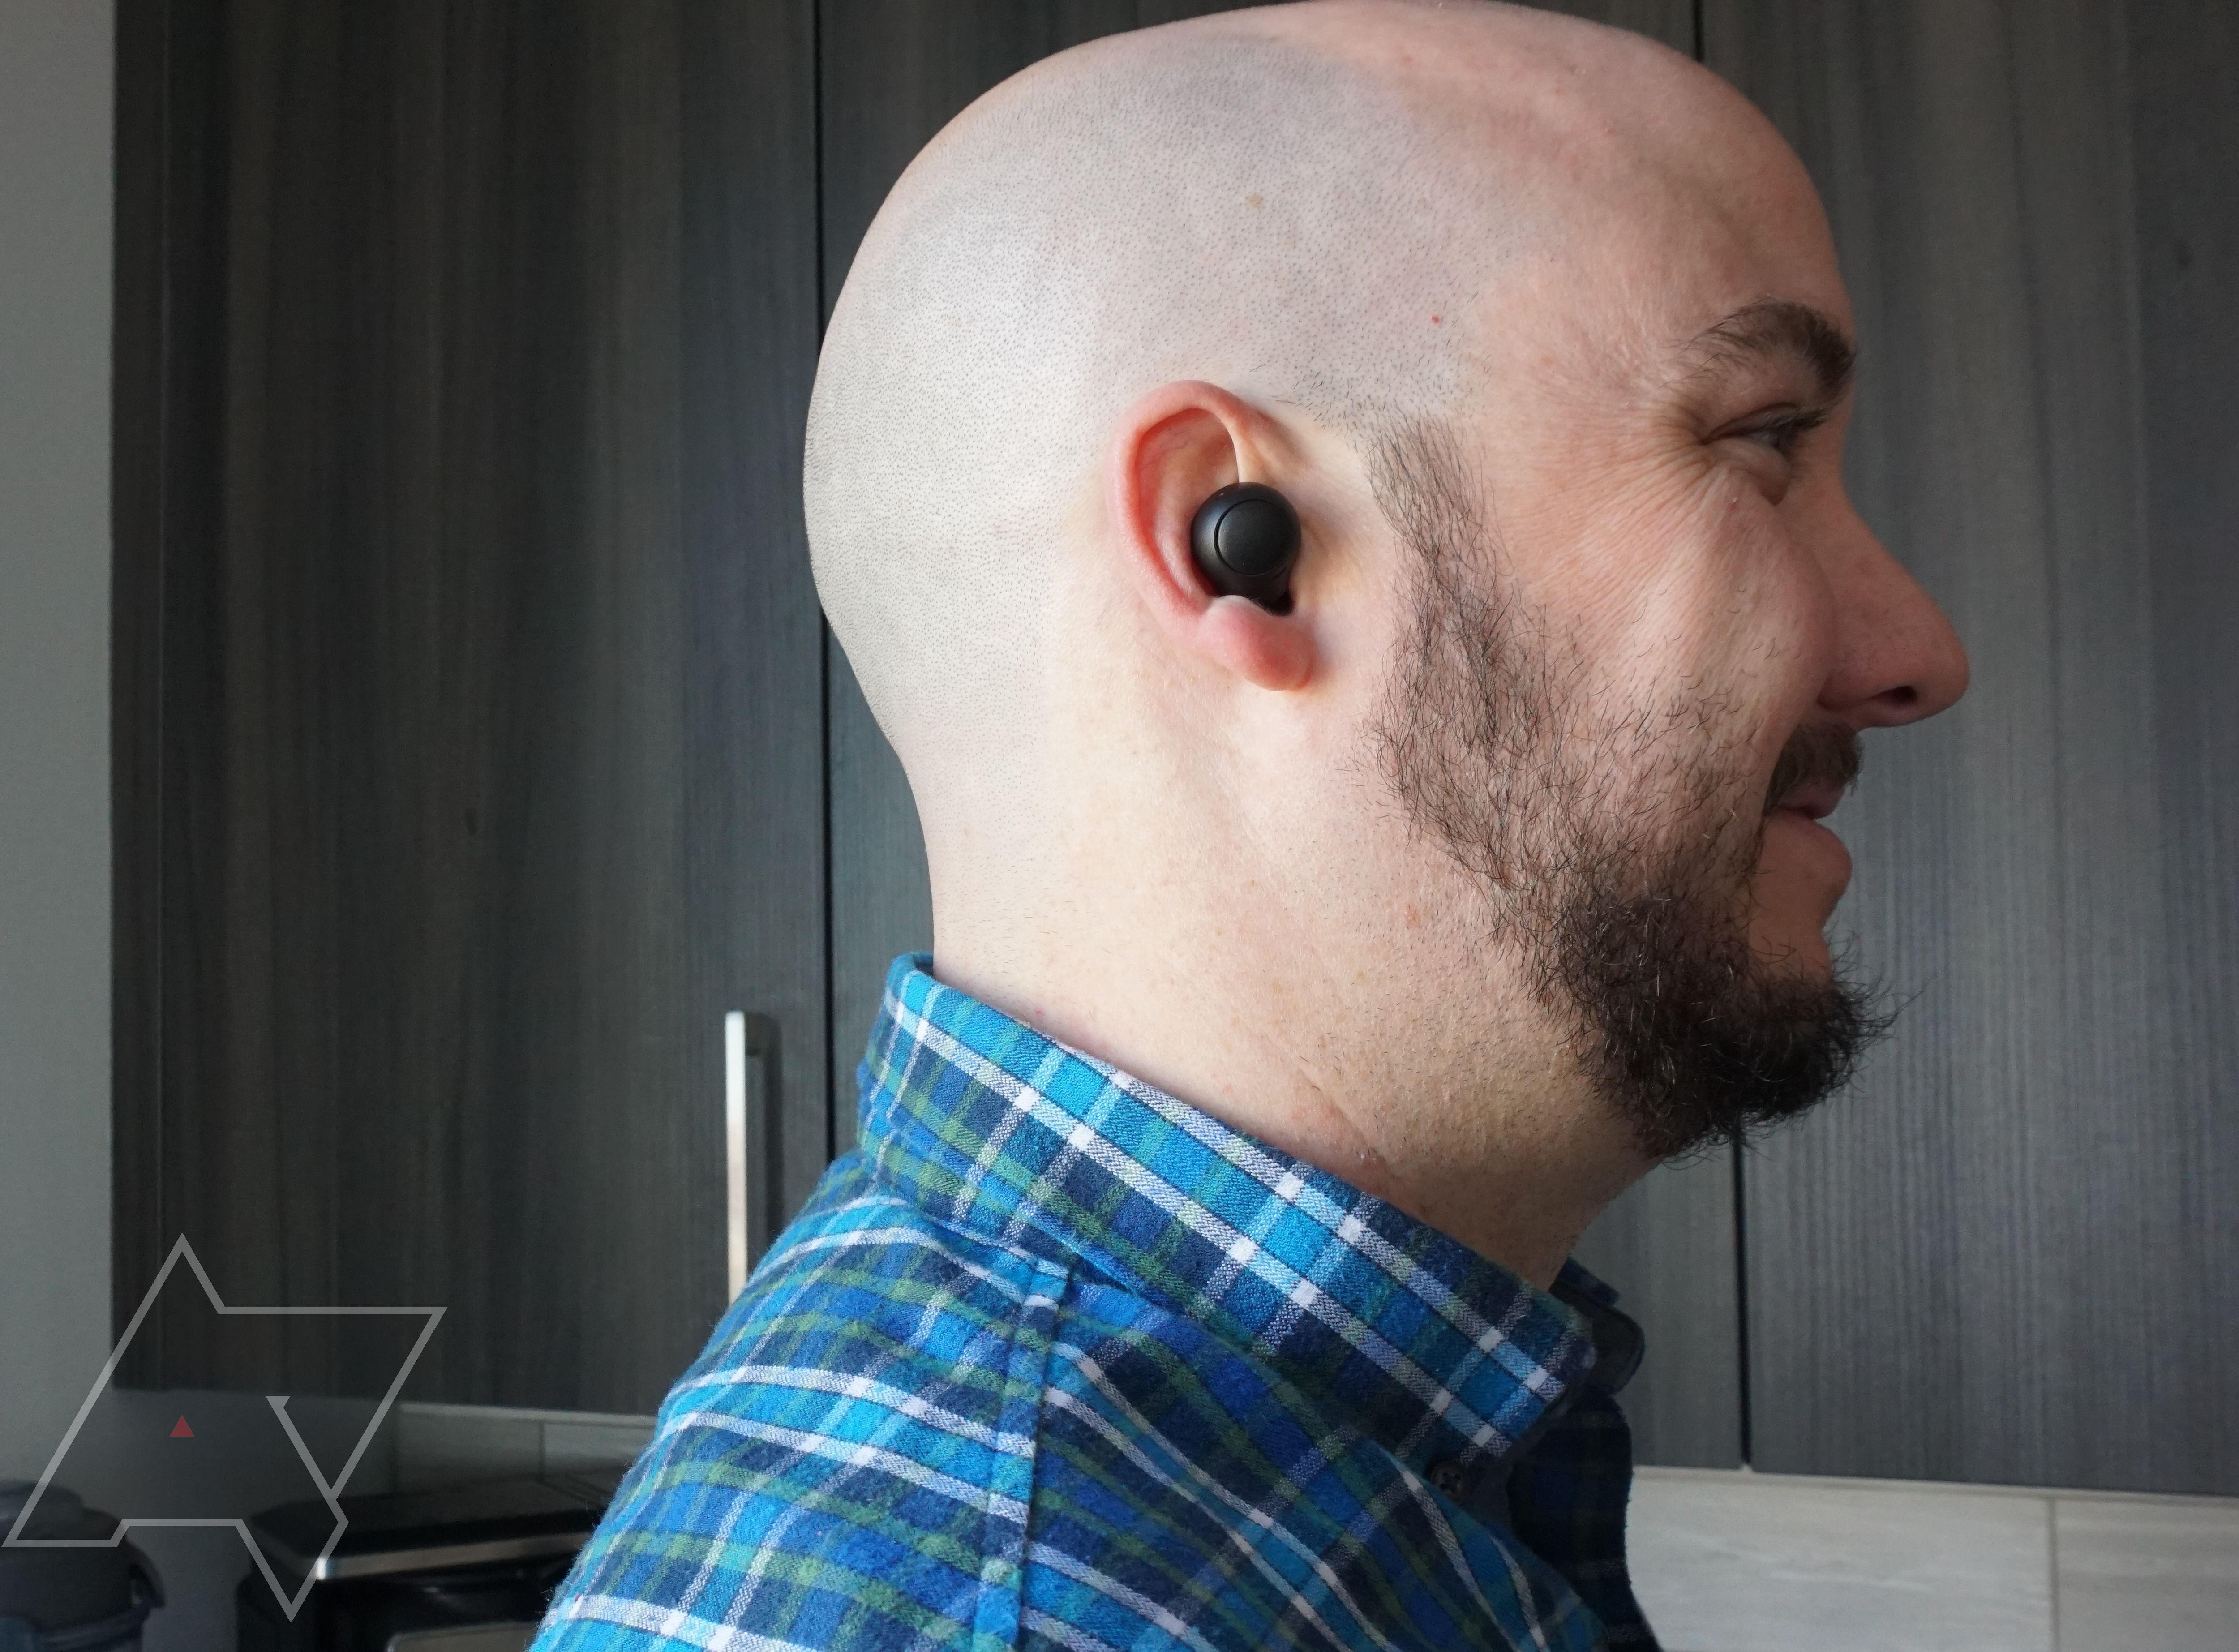 Sony WF-C500 review: budget earbuds for comfortable listening